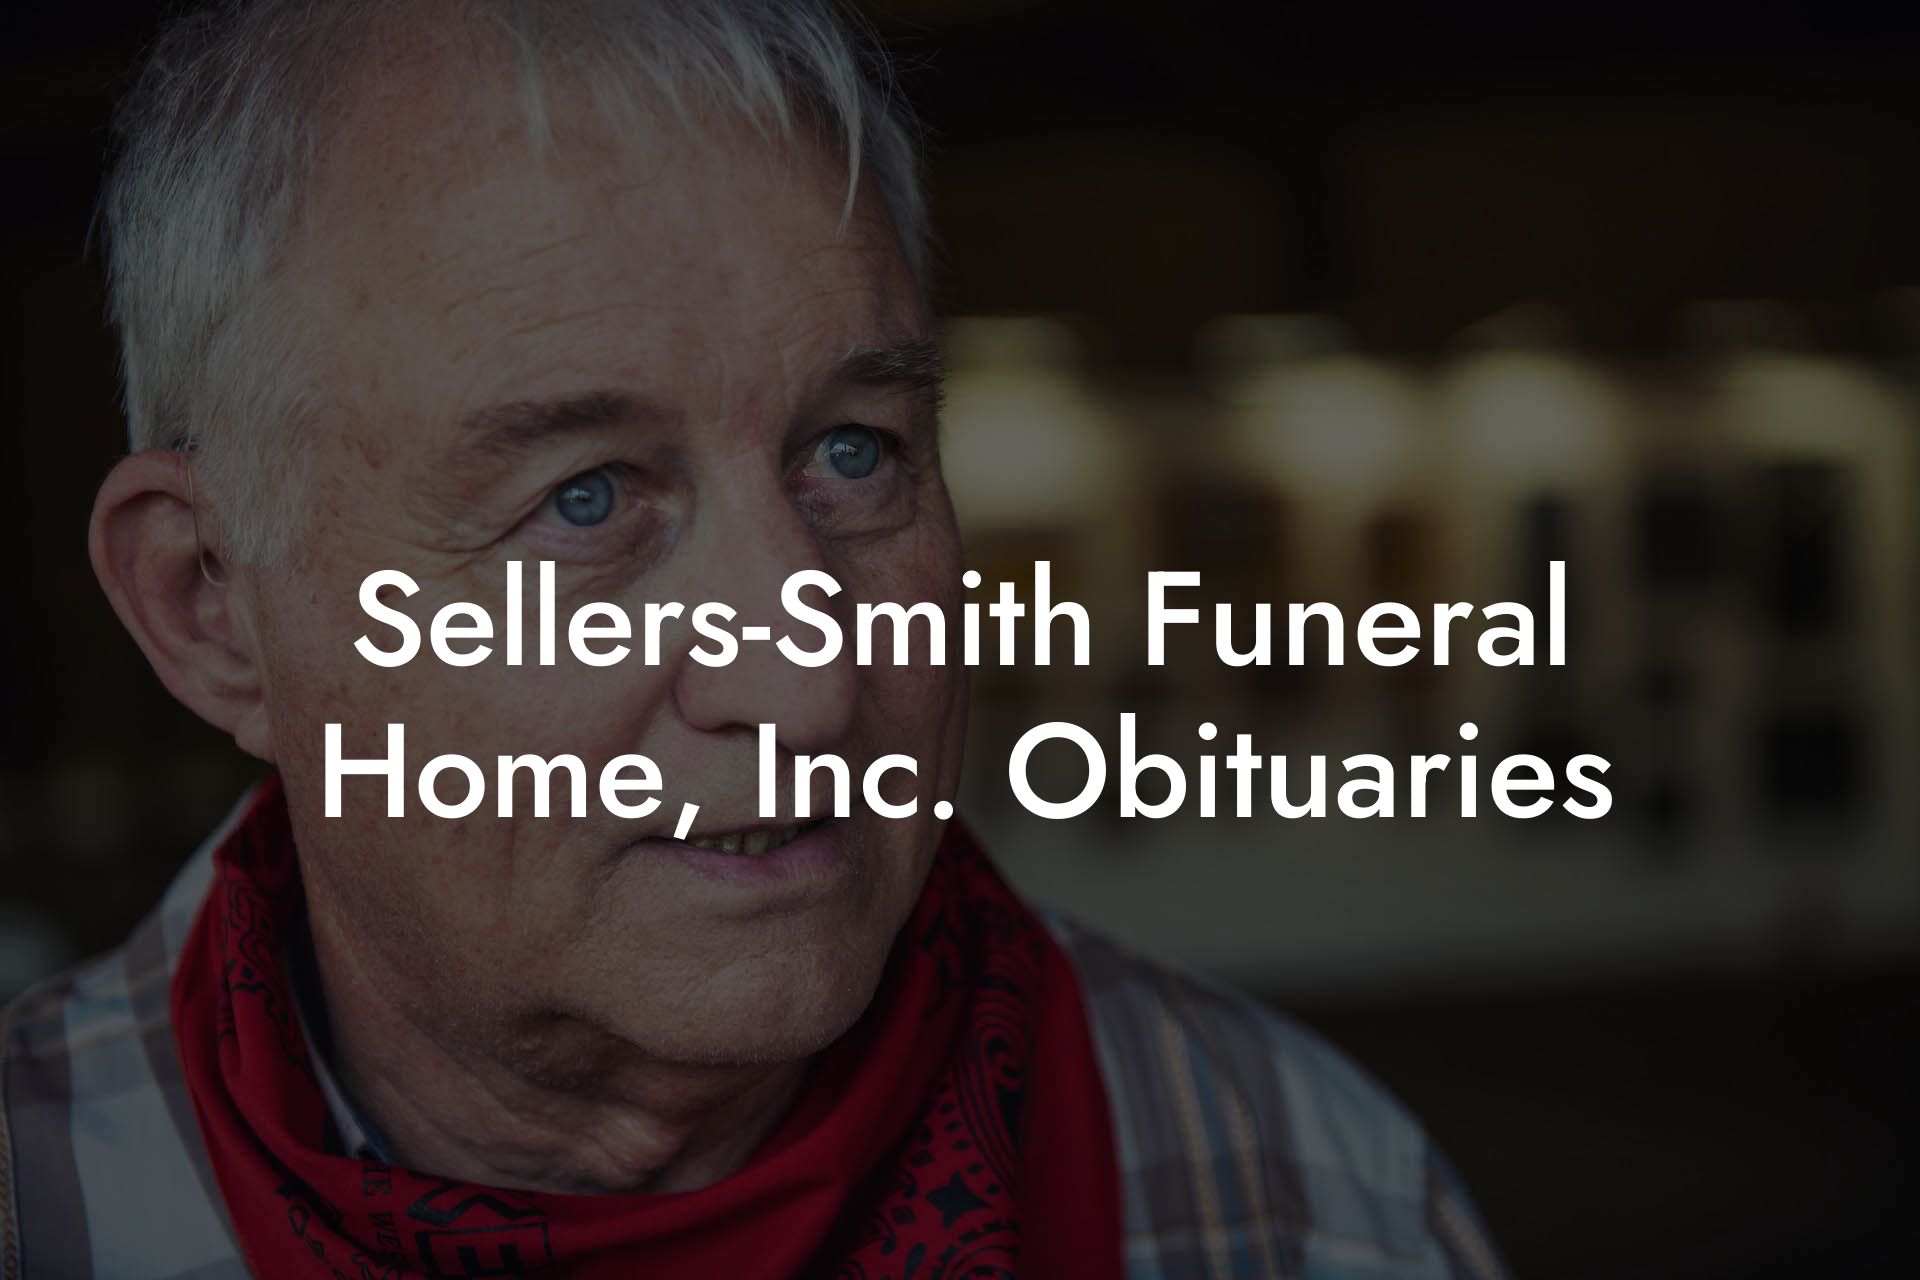 Sellers-Smith Funeral Home, Inc. Obituaries